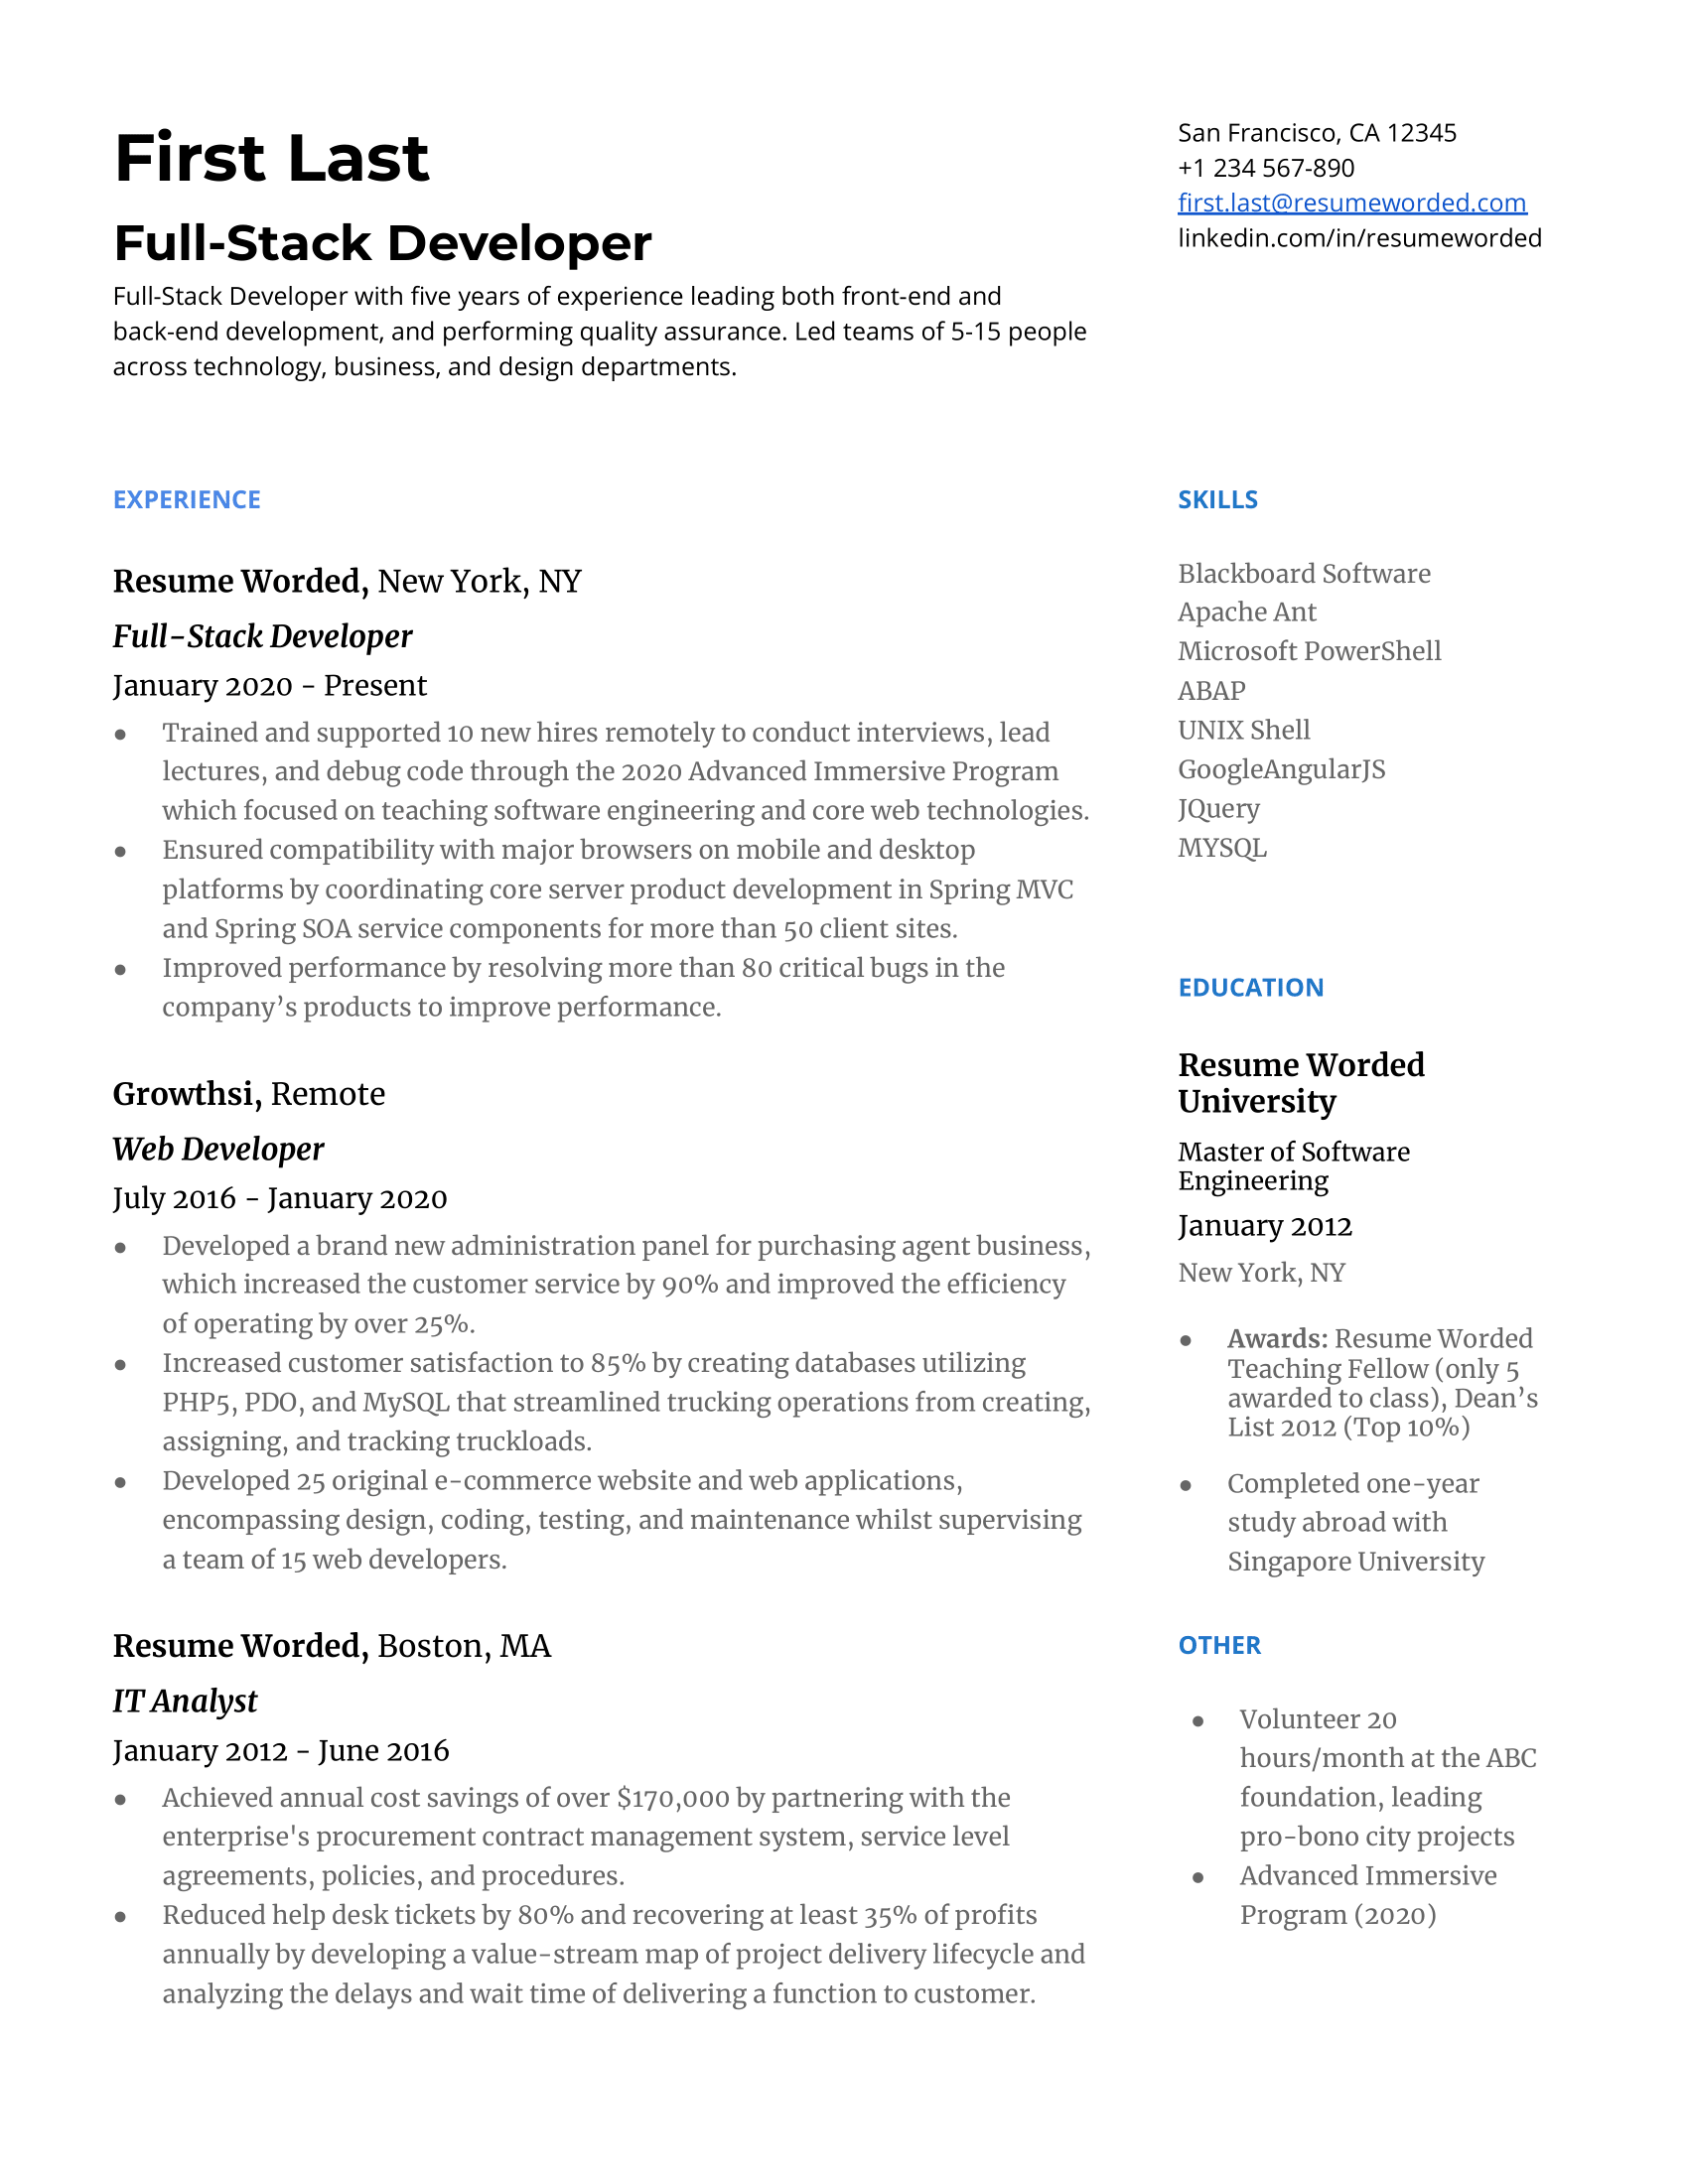 A general full stack developer resume with well-rounded experience, relevant hard skills, and education in software engineering. 